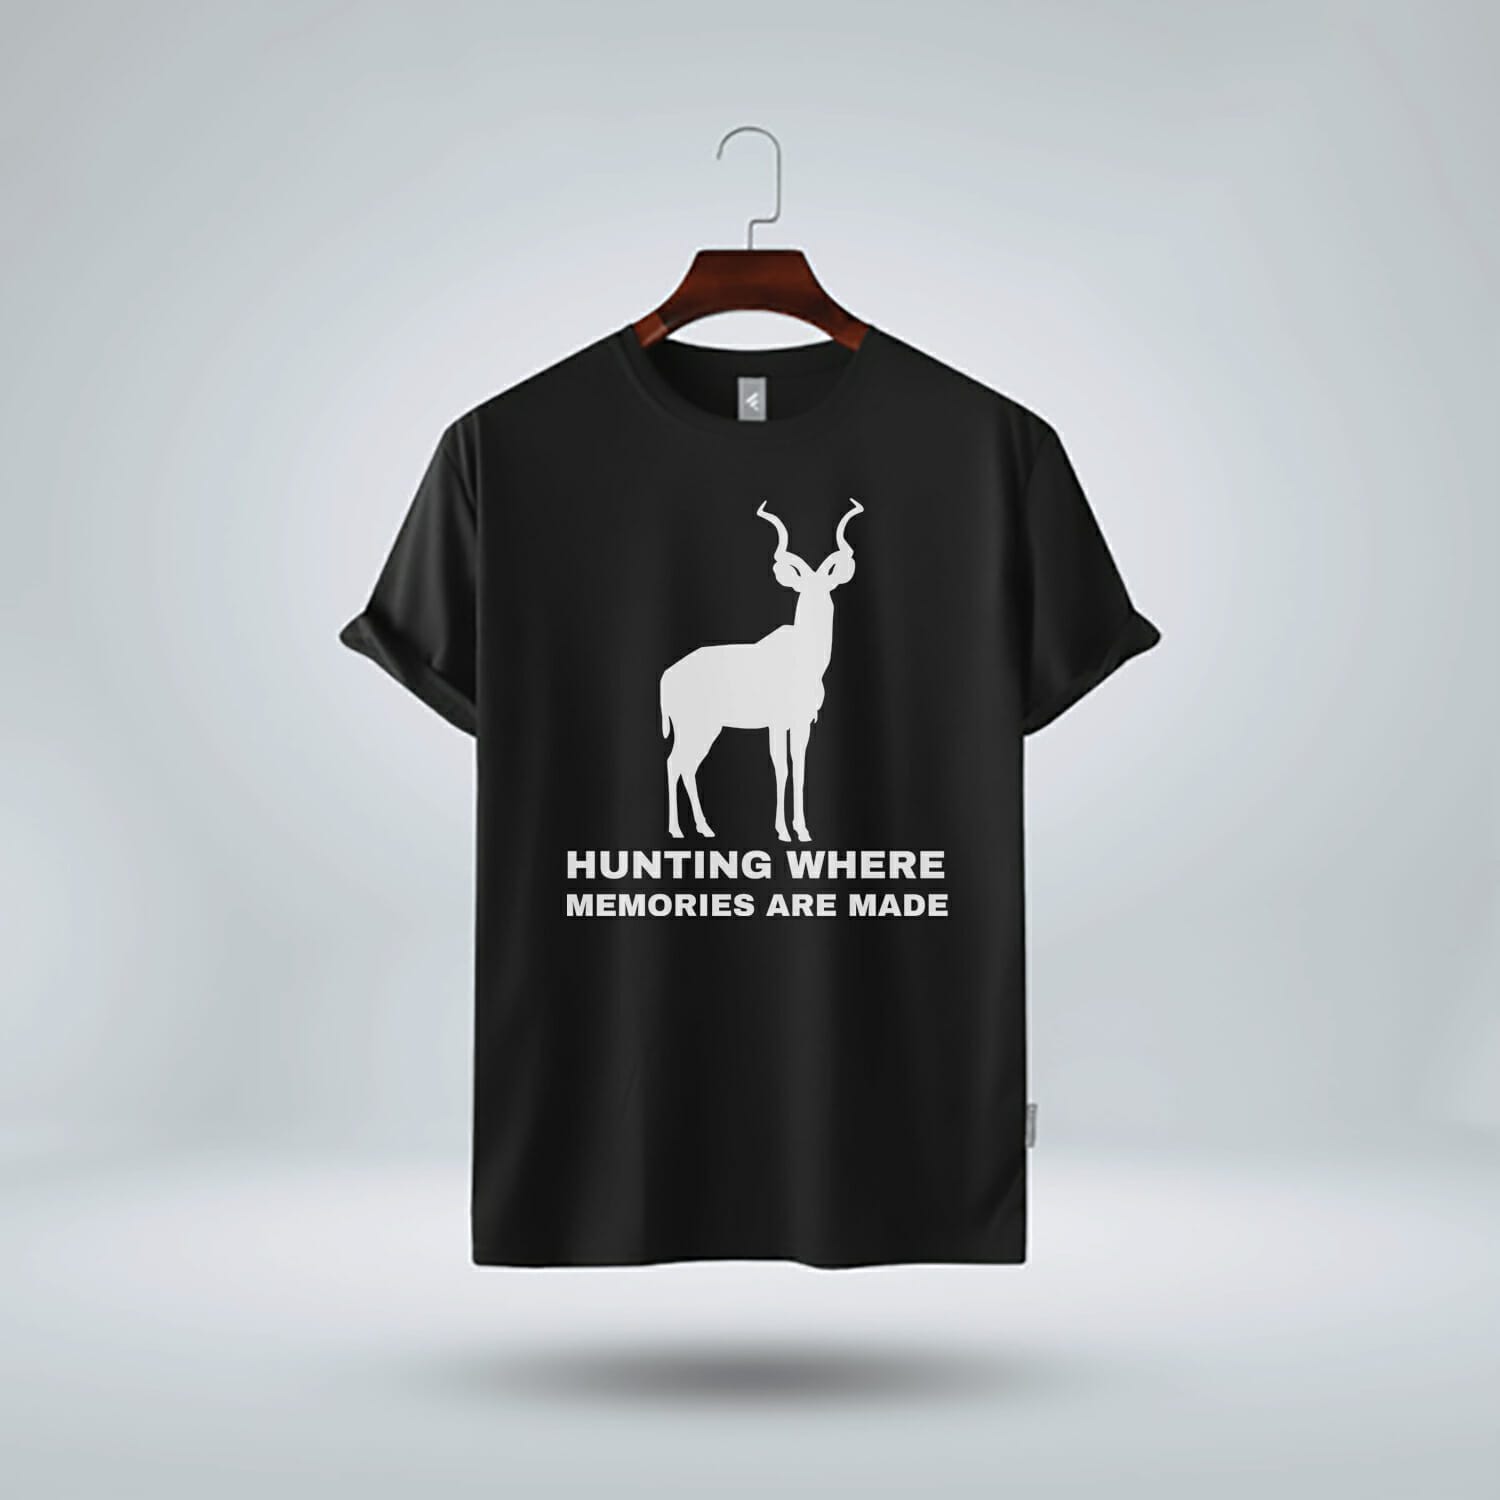 Hunting Where Memories Are Made T-Shirt Design